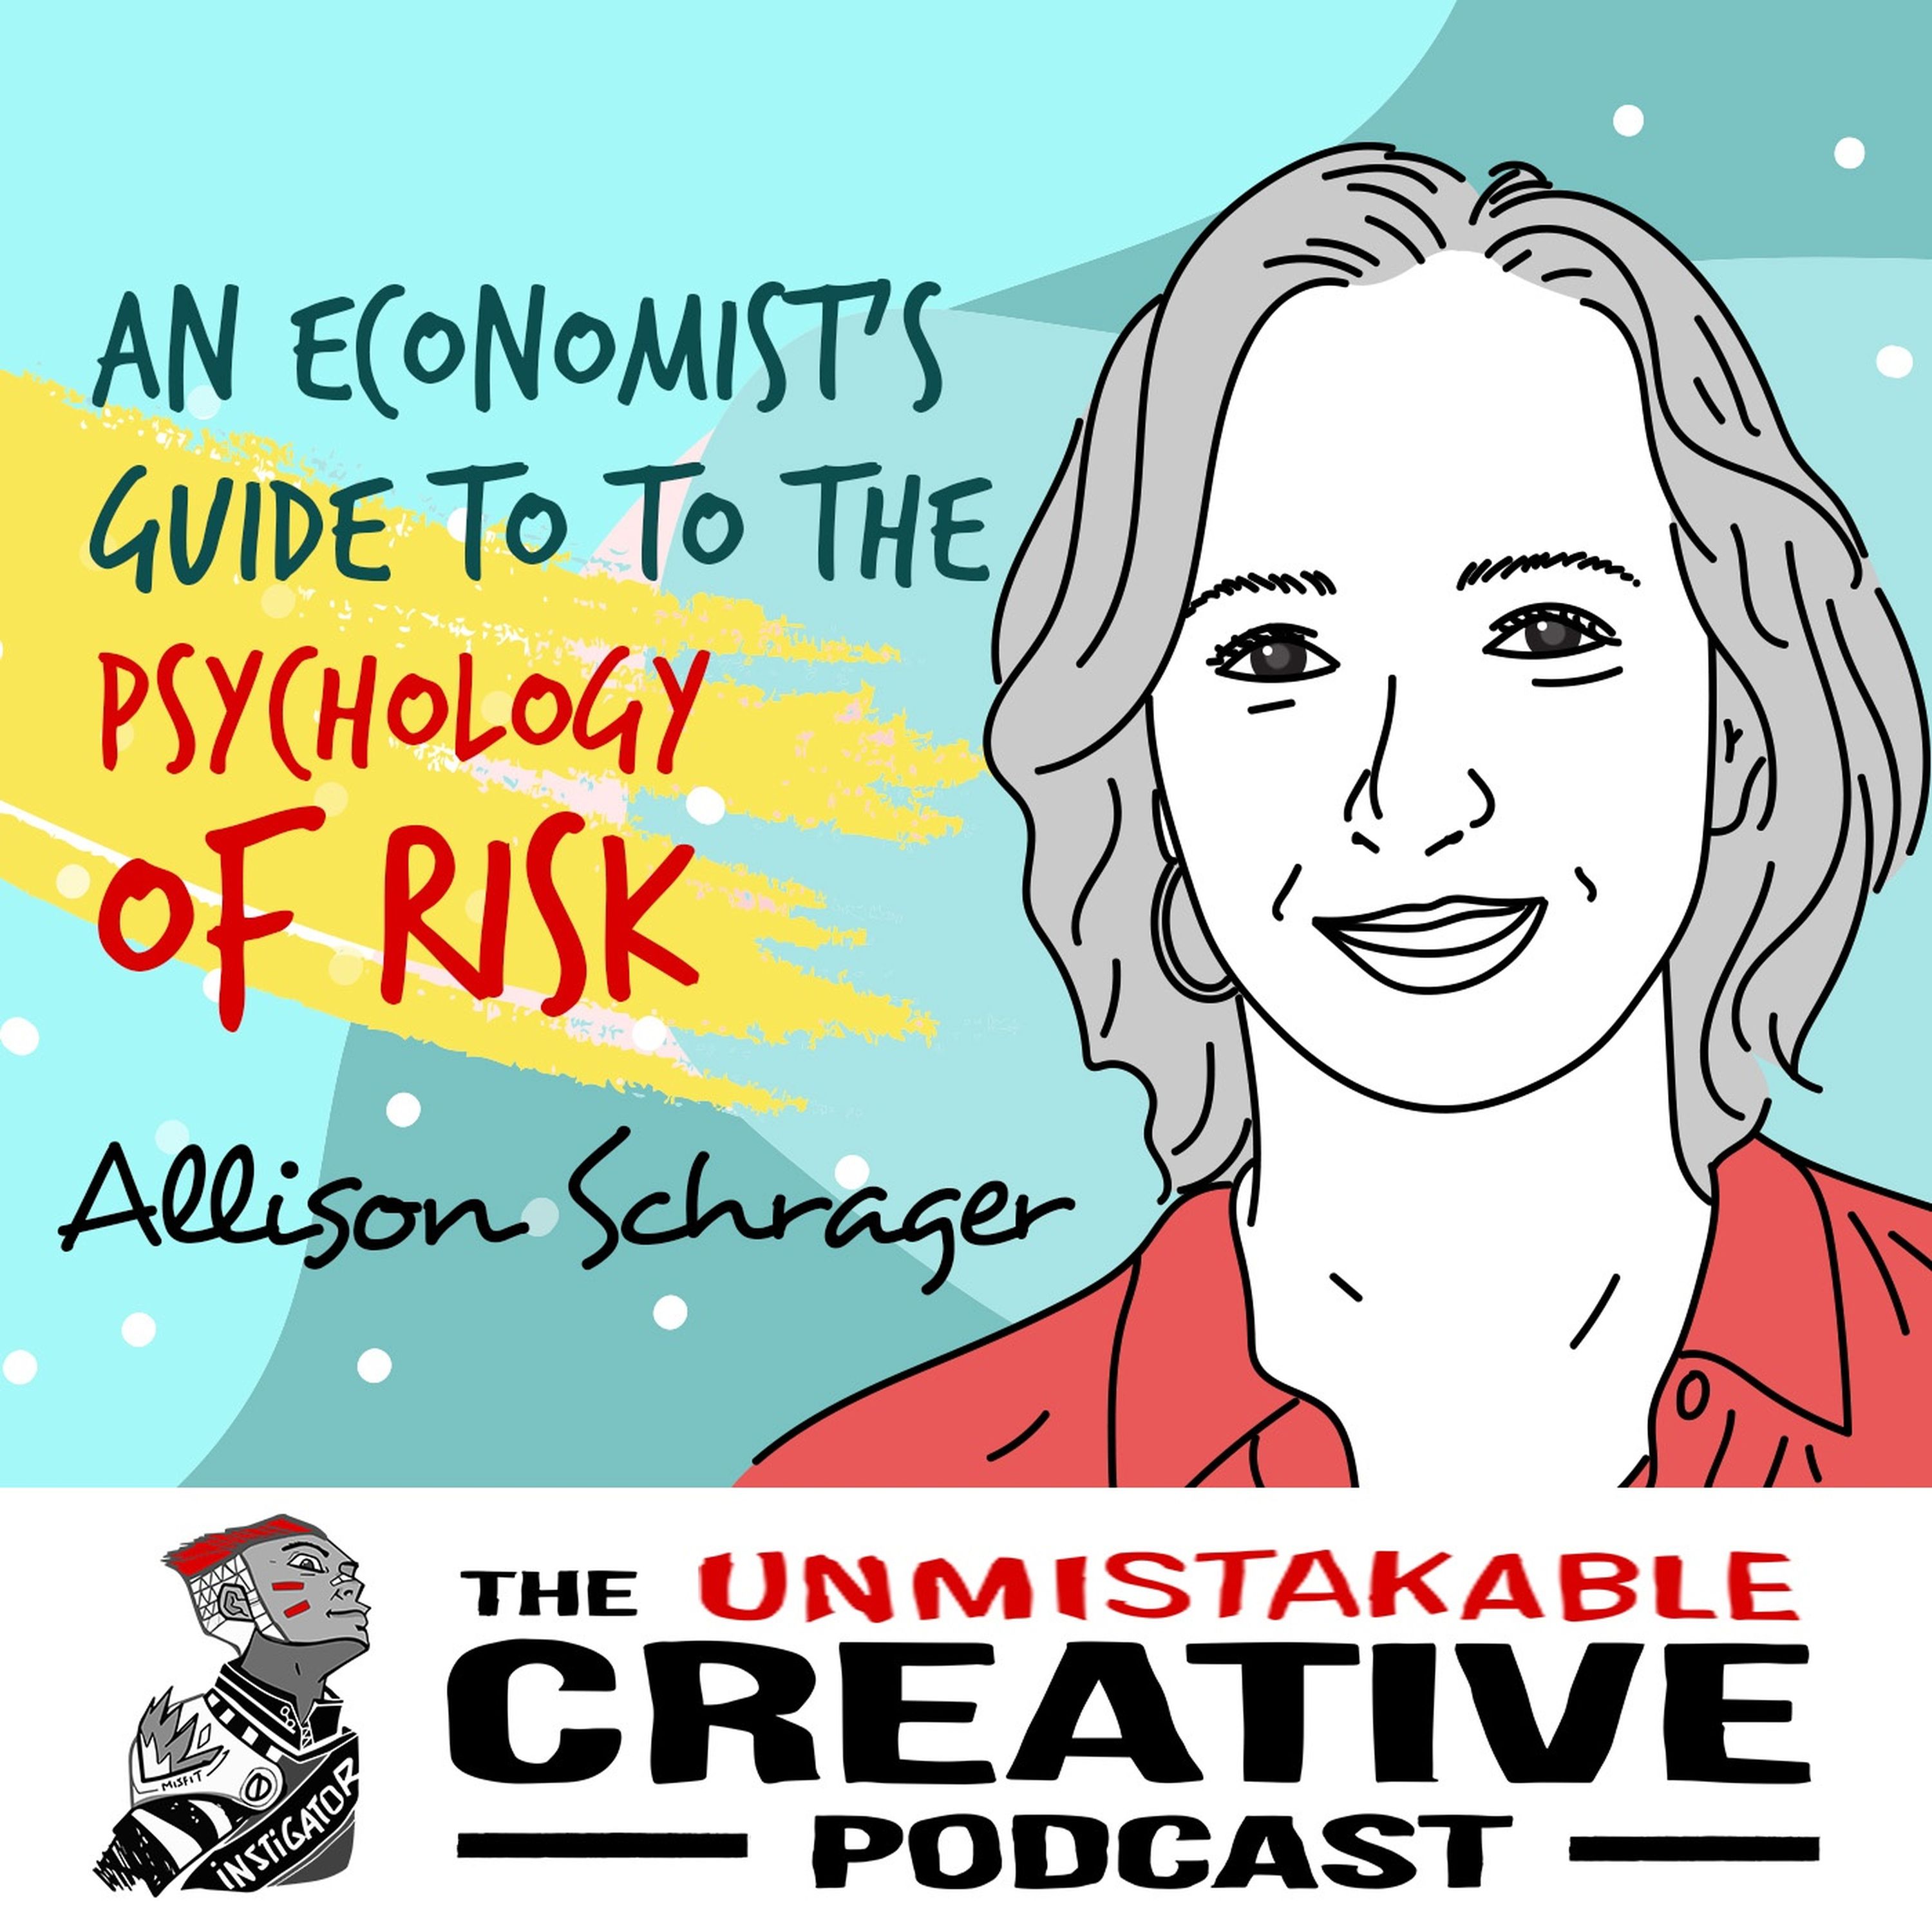 Allison Schrager: An Economist’s Guide to The Psychology of Risk Image